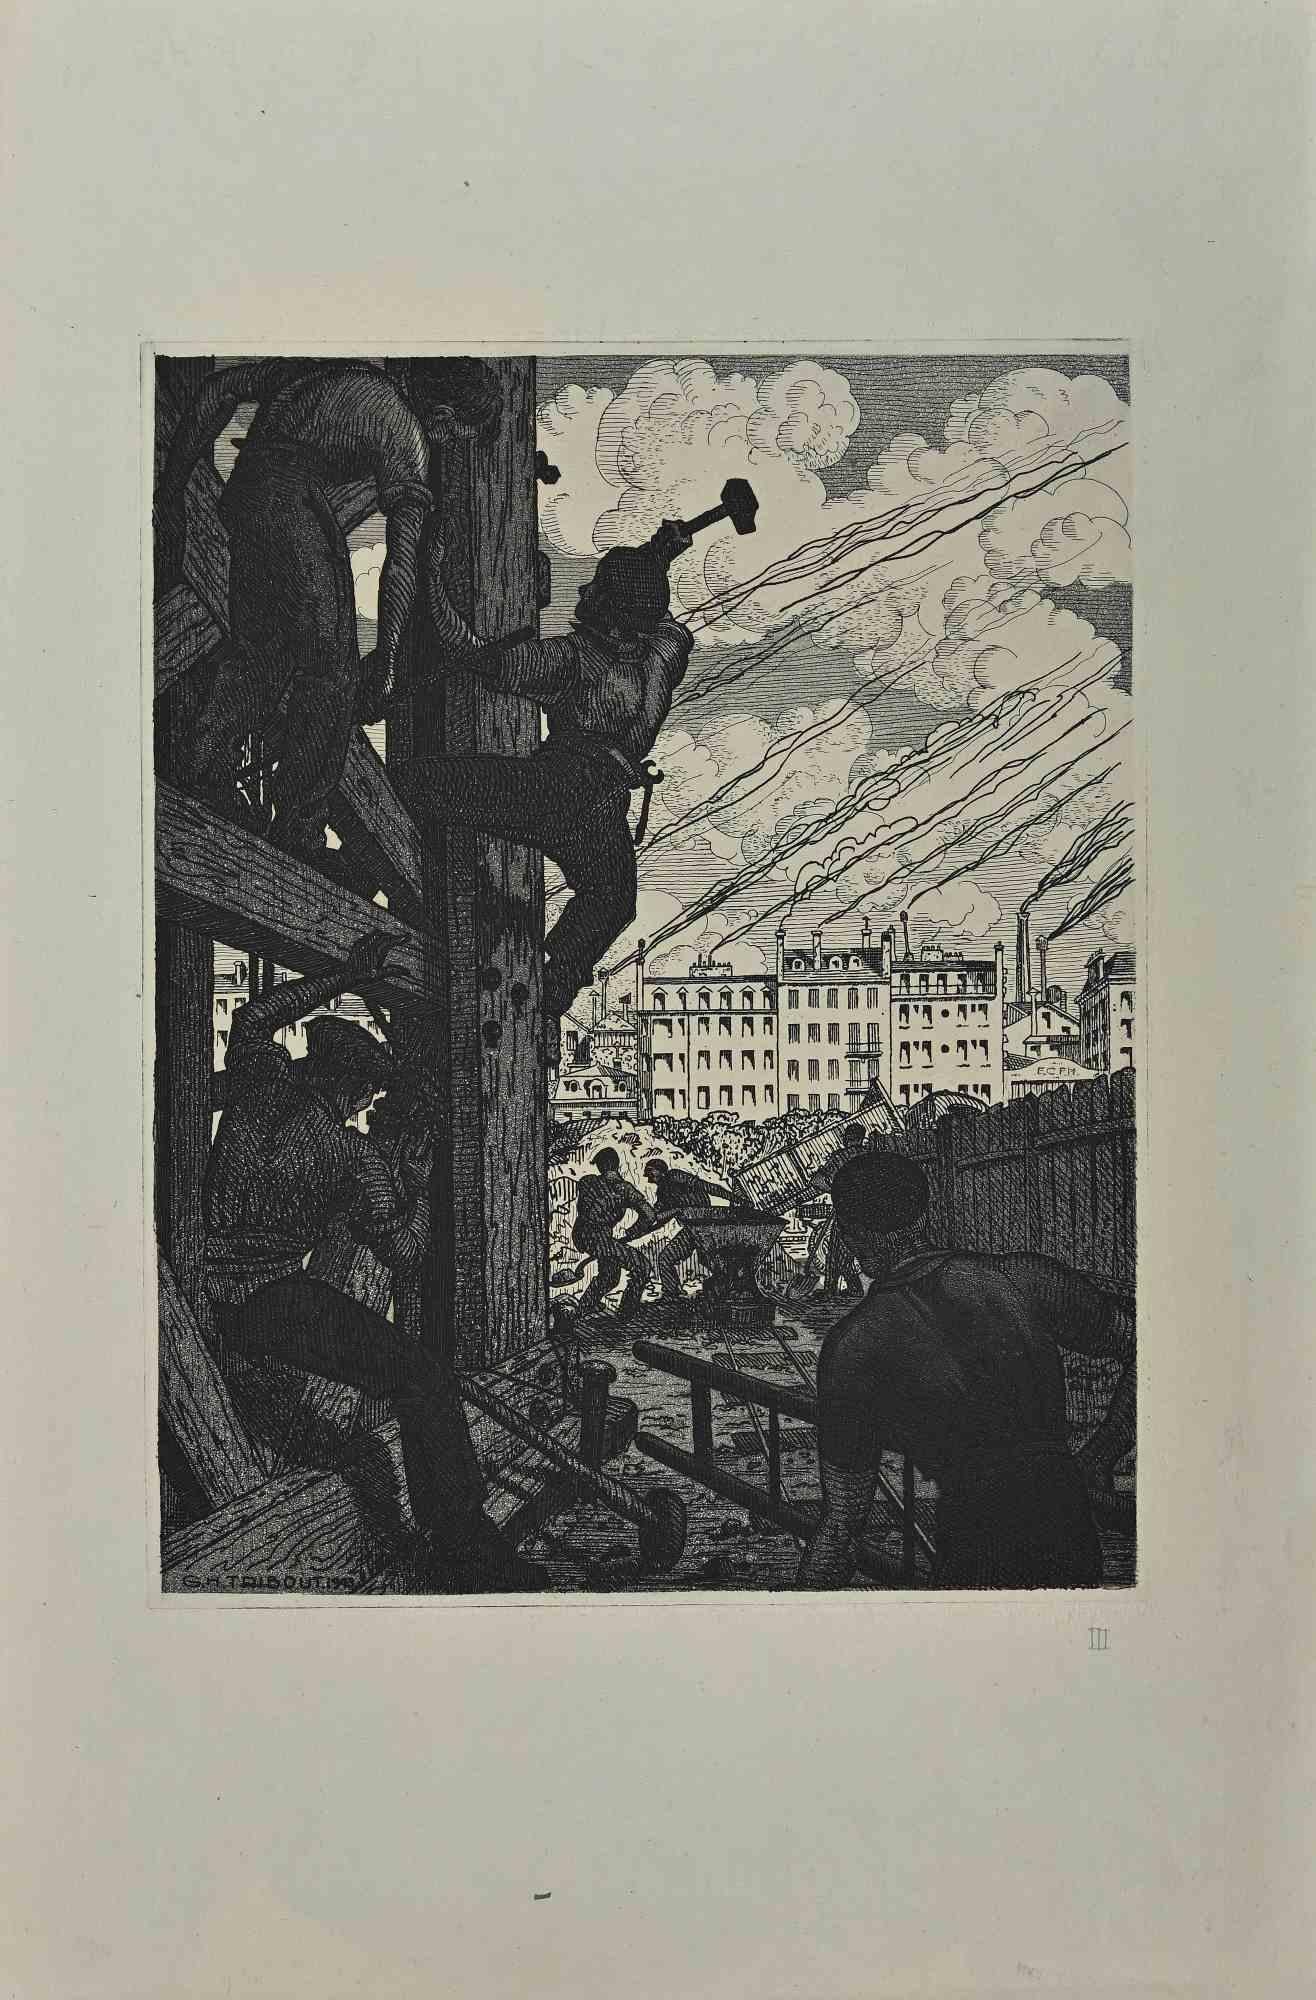 Georges-Henri Tribout Figurative Print - Men at Work  -Original Etching by George-Henri Tribout - 1940s